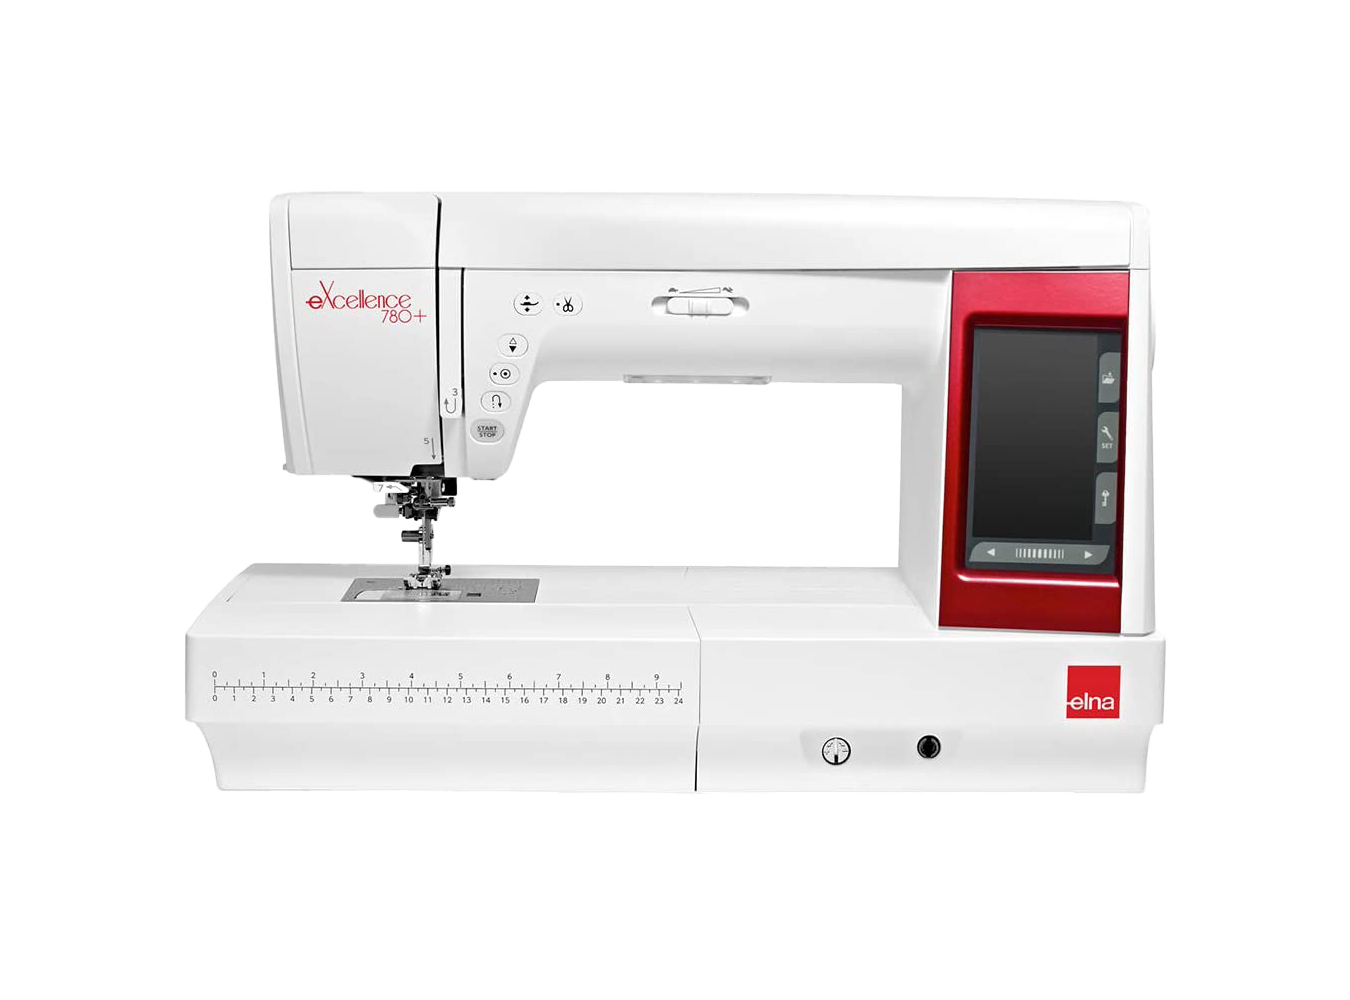 Elna eXcellence 780 PLUS Sewing Machine